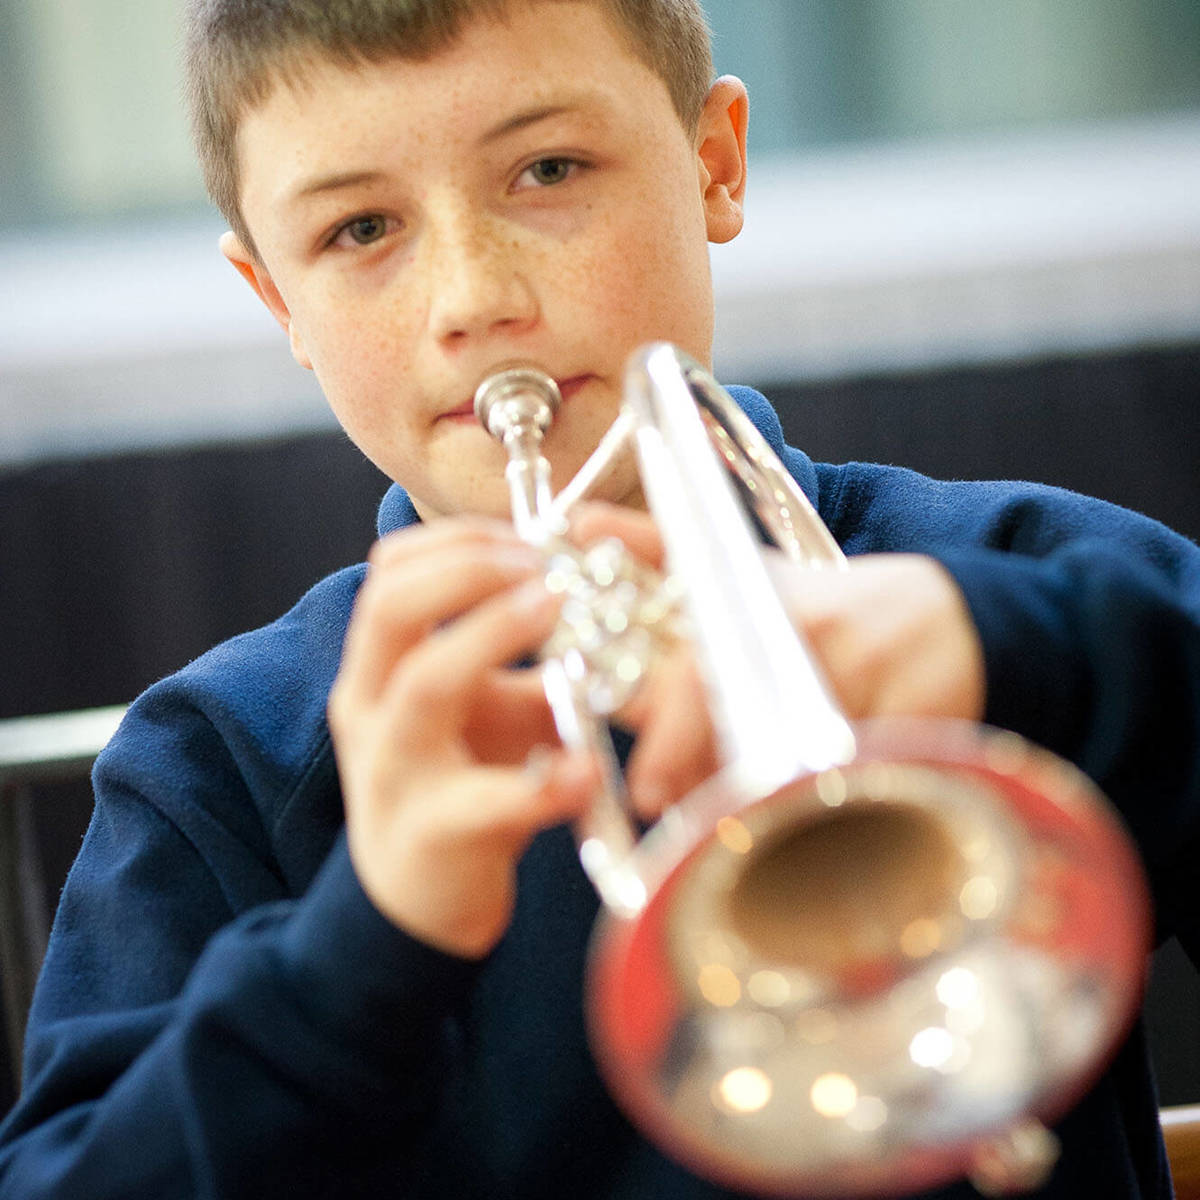 Pupils-learning young boy playing the trumpet 